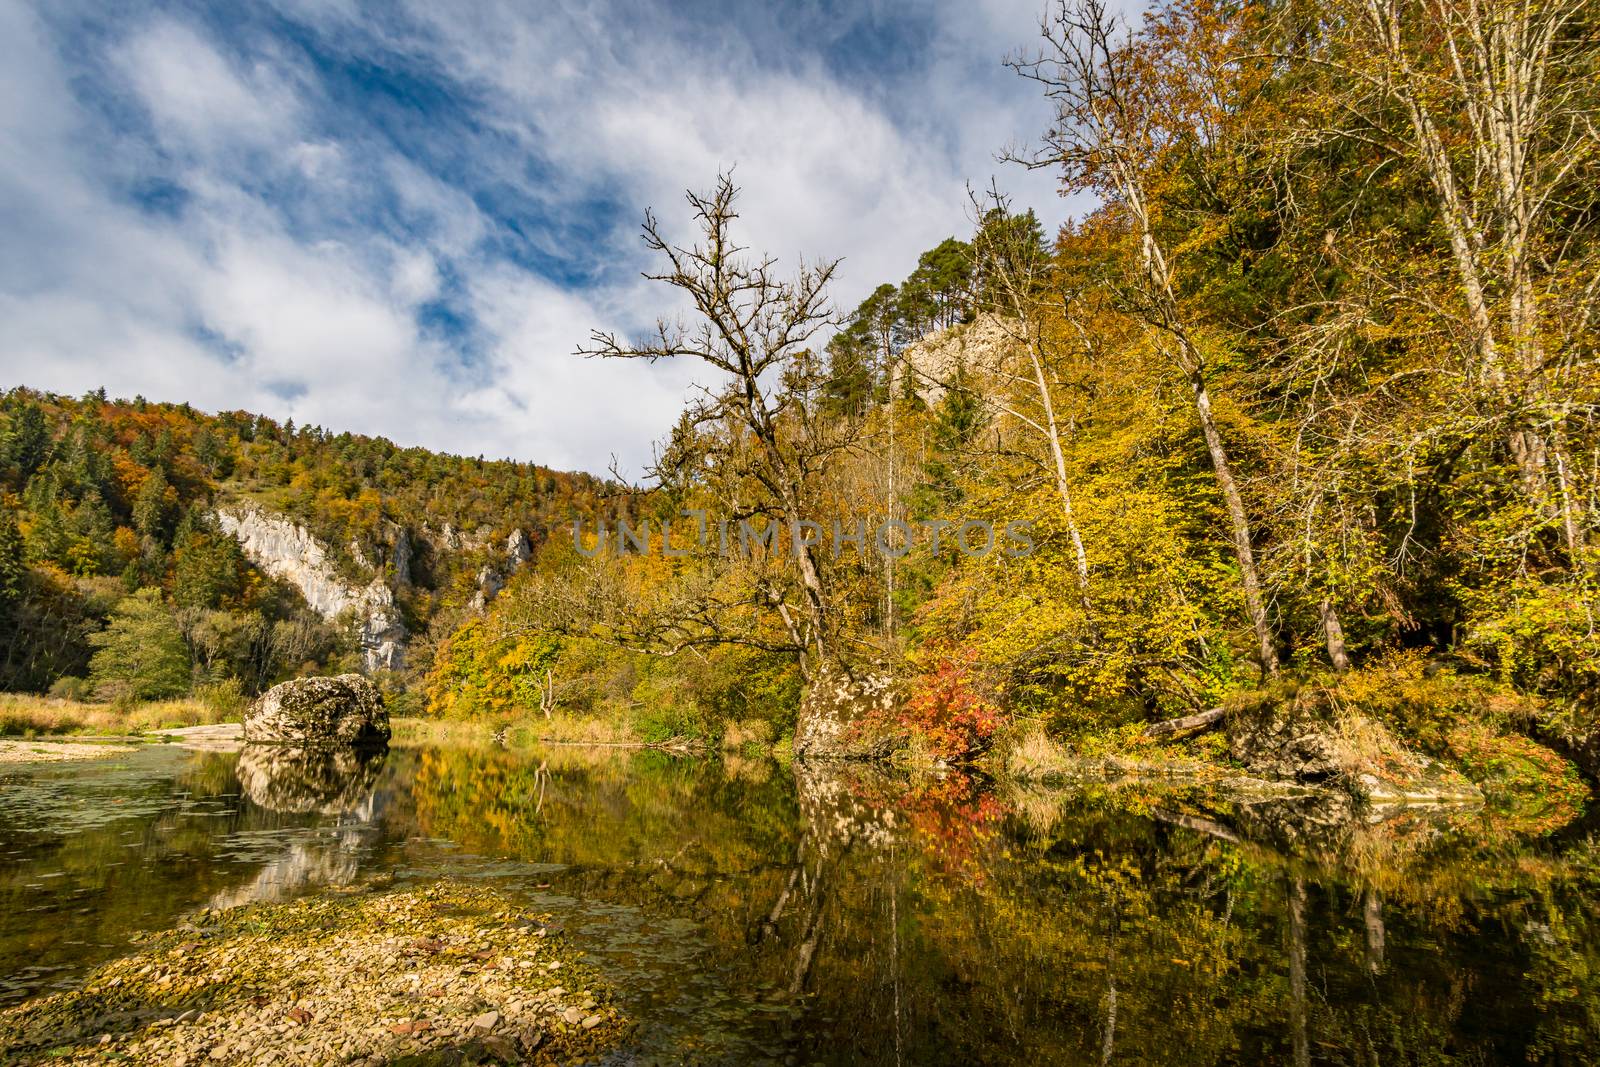 Fantastic autumn hike in the beautiful Danube valley near the Beuron monastery by mindscapephotos